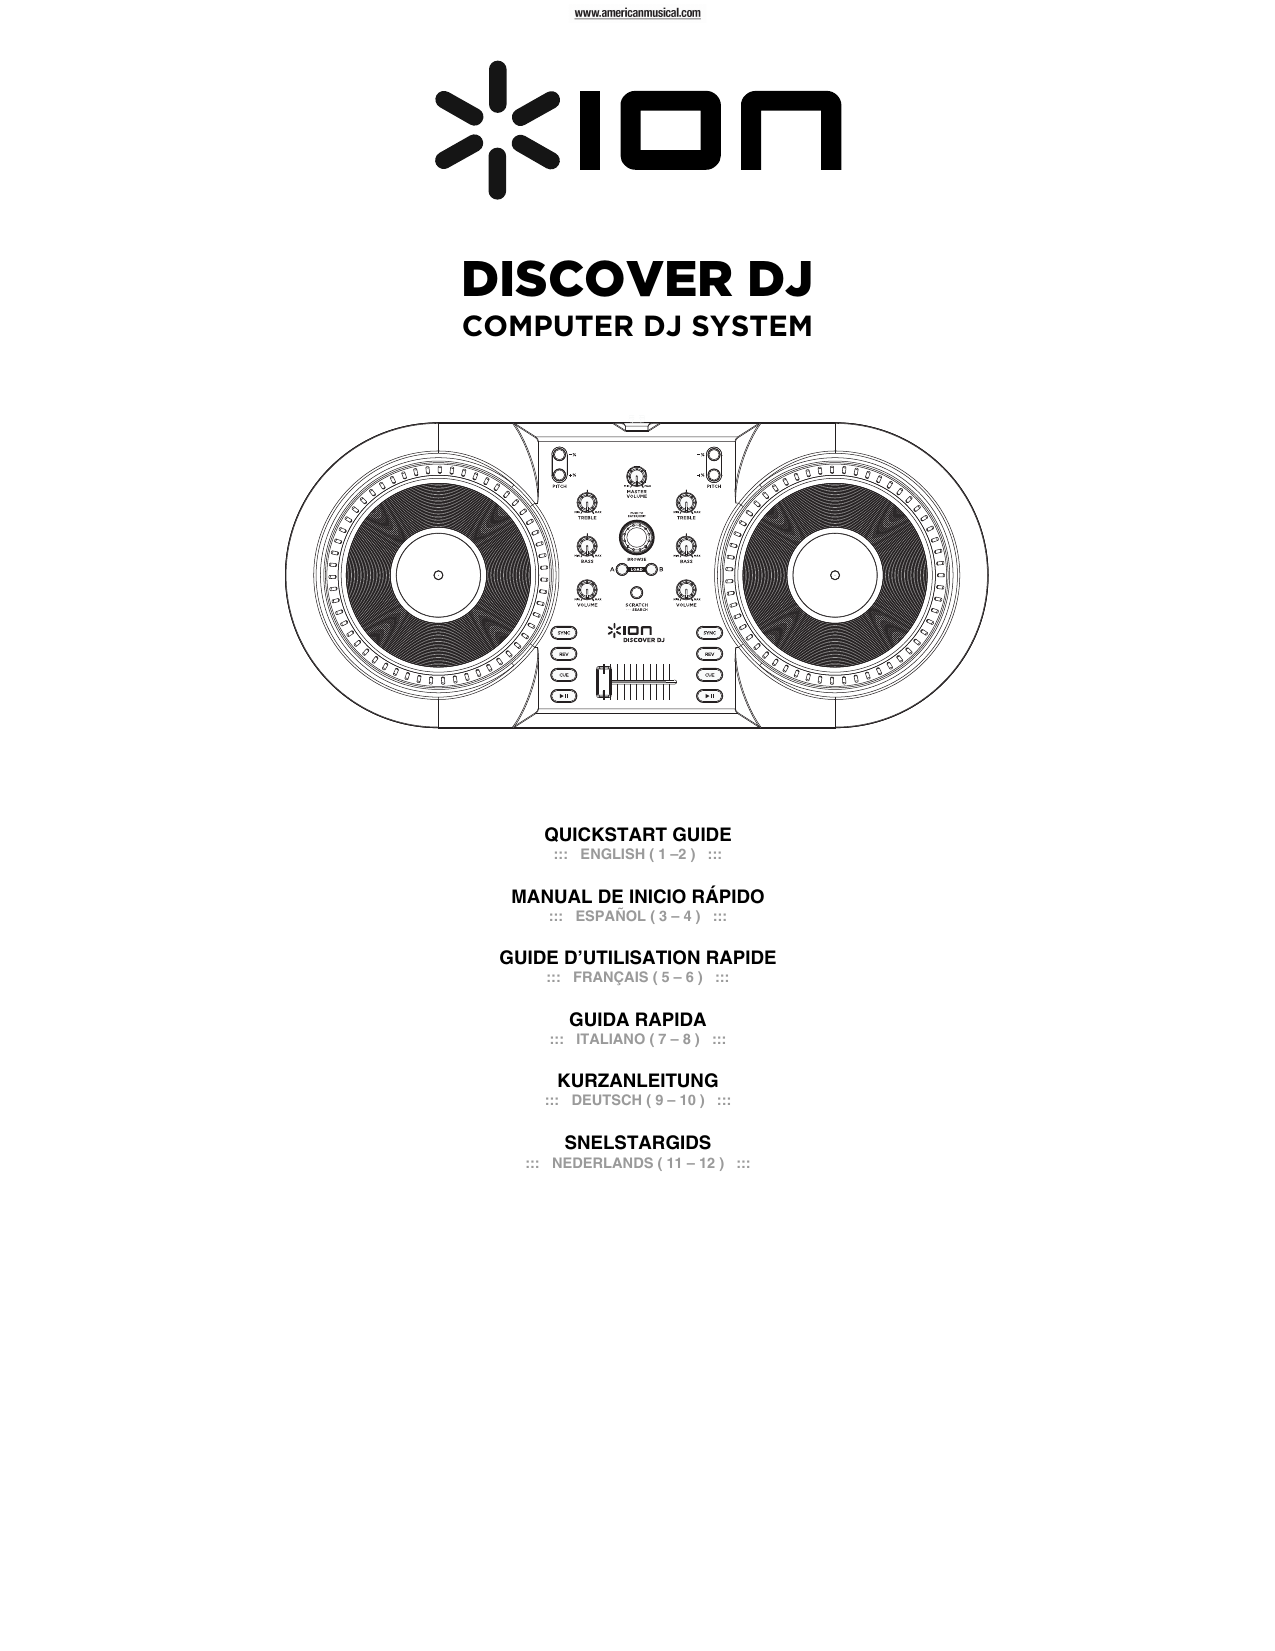 ion discover dj software download windows 7